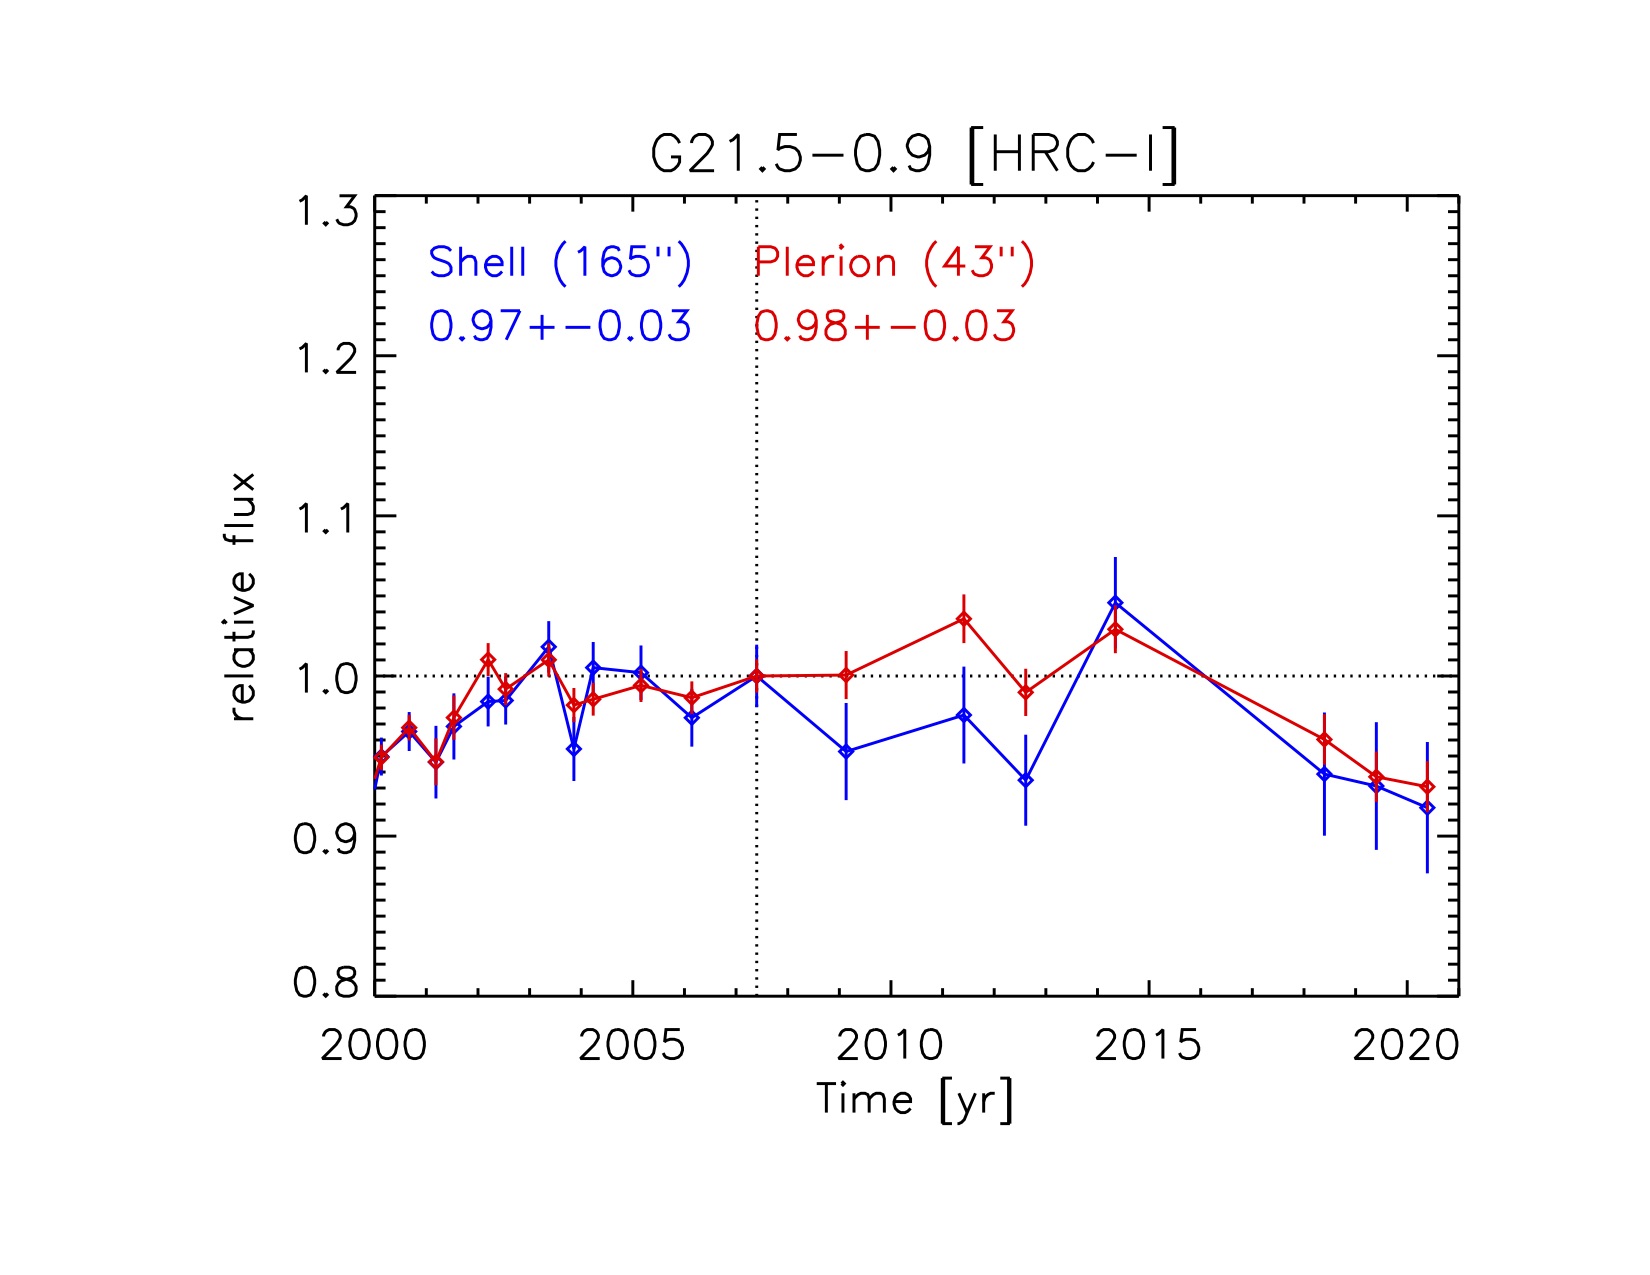 G21.5-00.9 predicted fluxes for shell and plerion